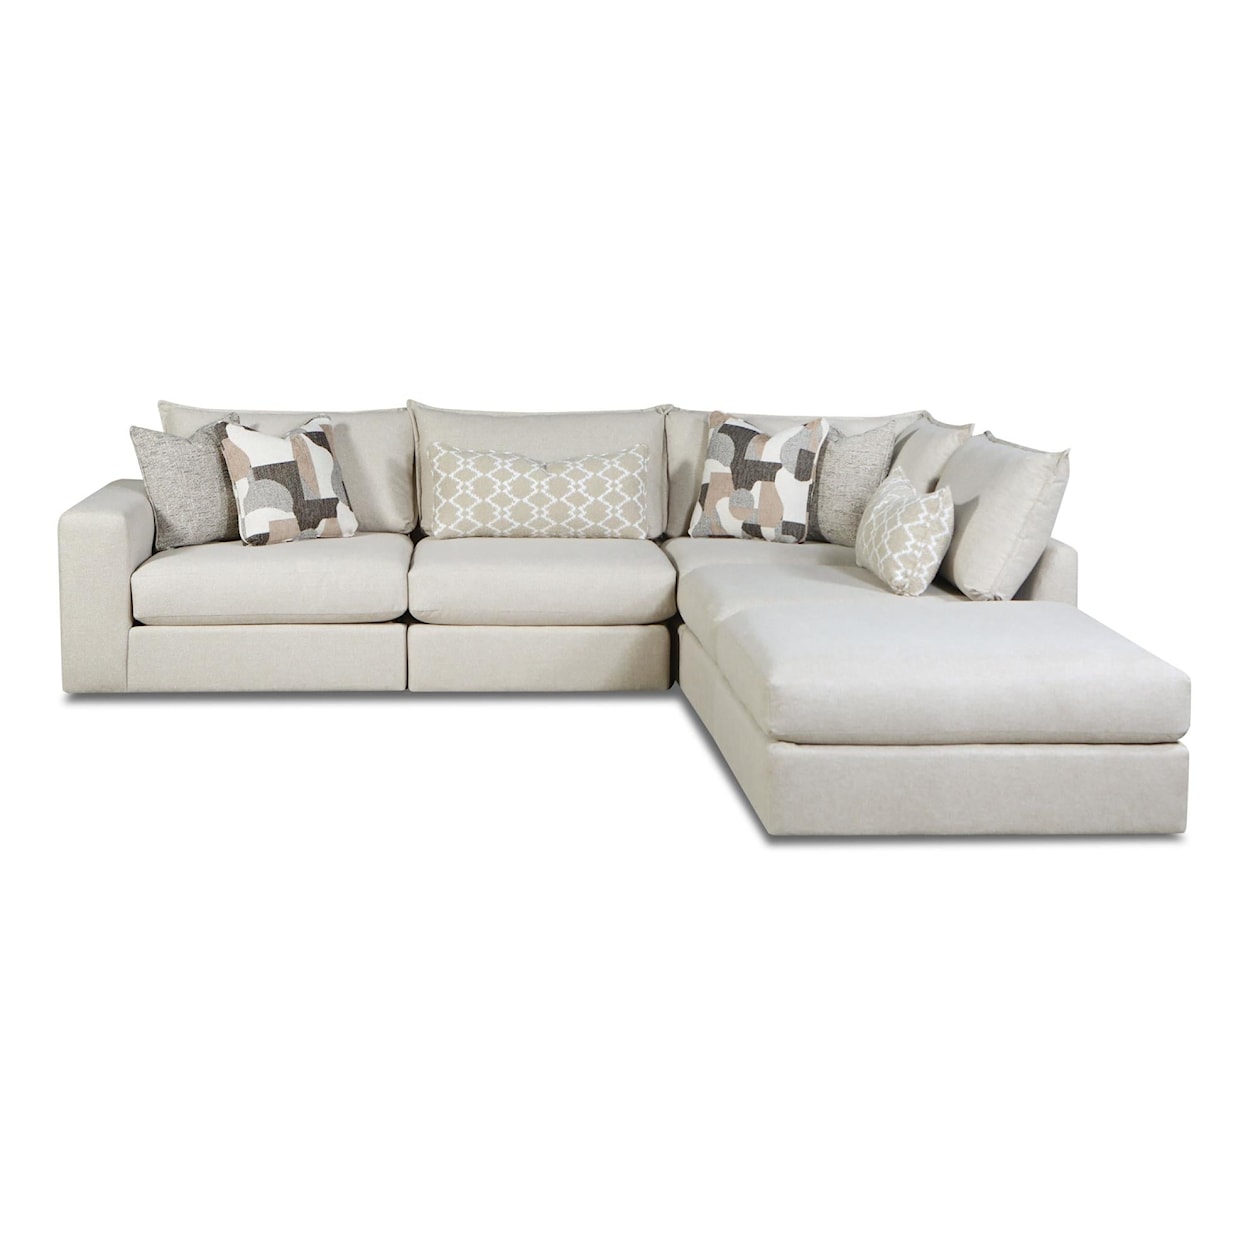 Fusion Furniture 7000 GOLD RUSH ANTIQUE Sectional